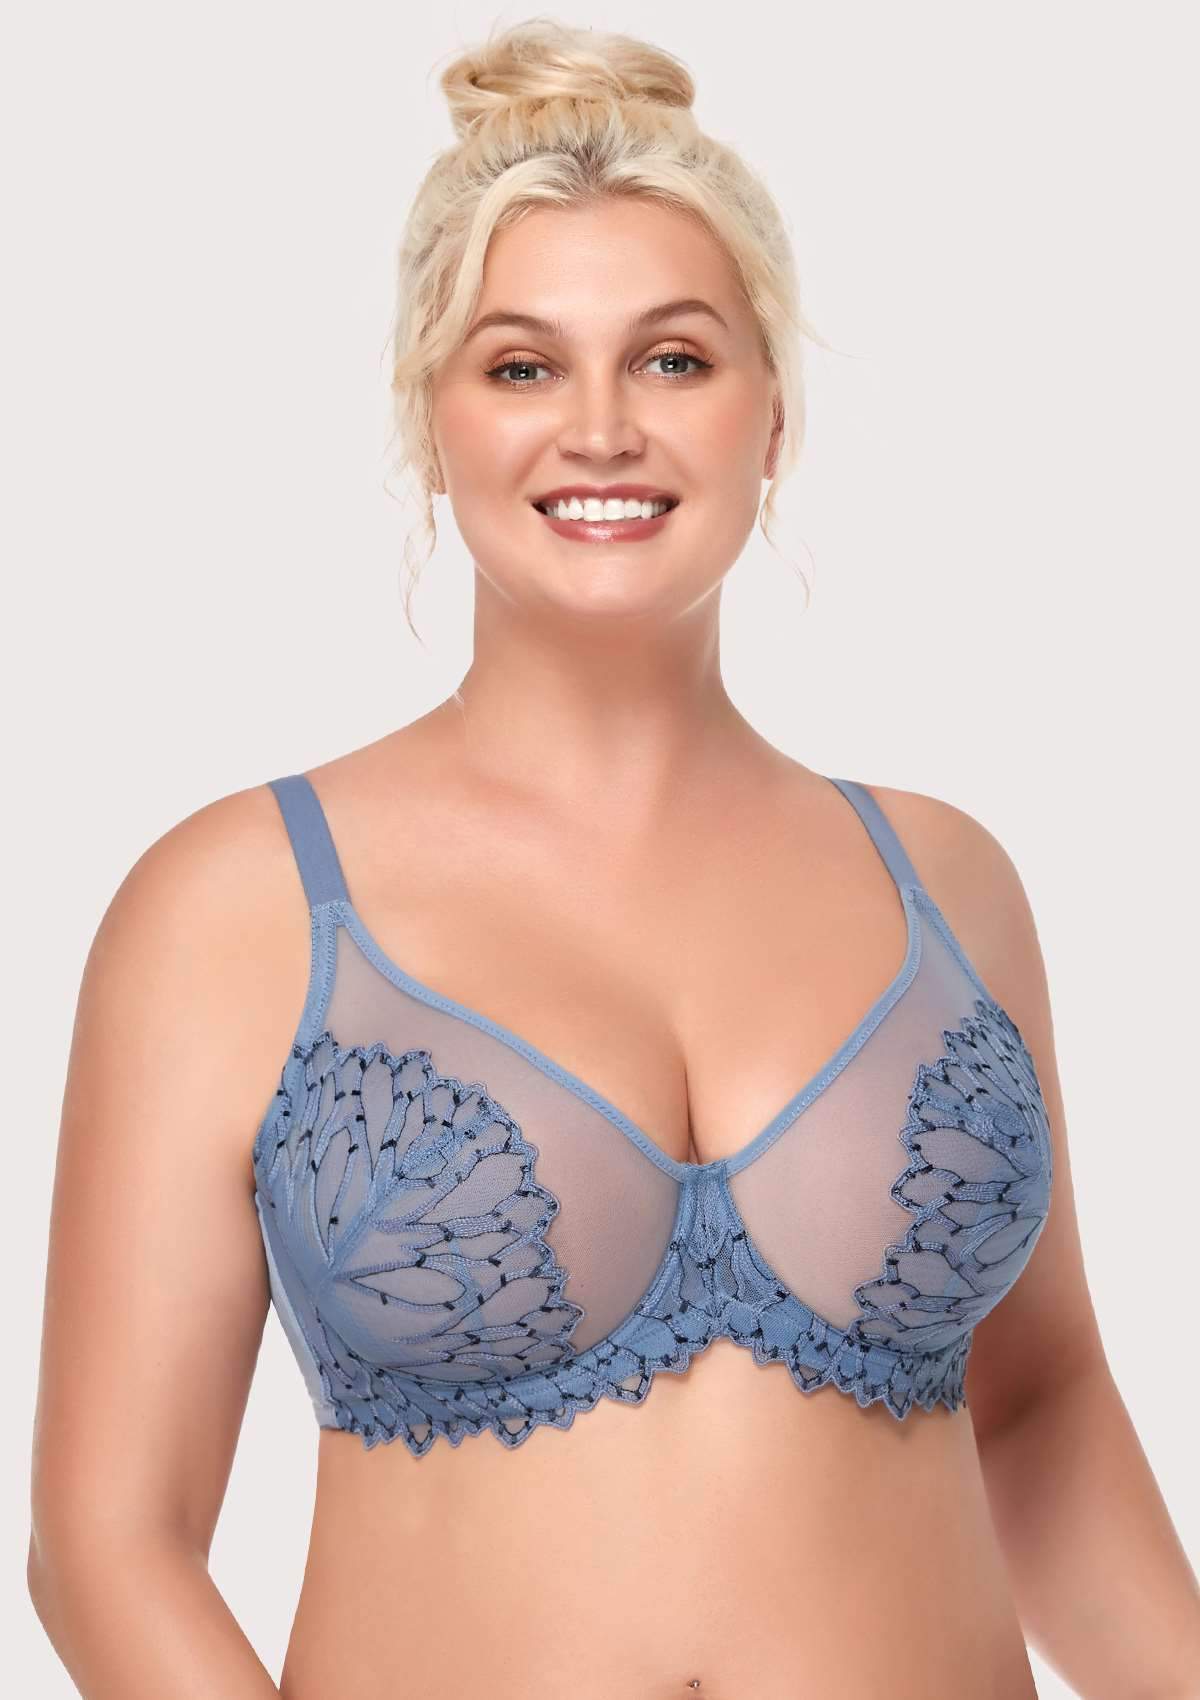 HSIA Chrysanthemum Plus Size Lace Bra: Back Support Bra For Posture - Light Pink / 32 / D